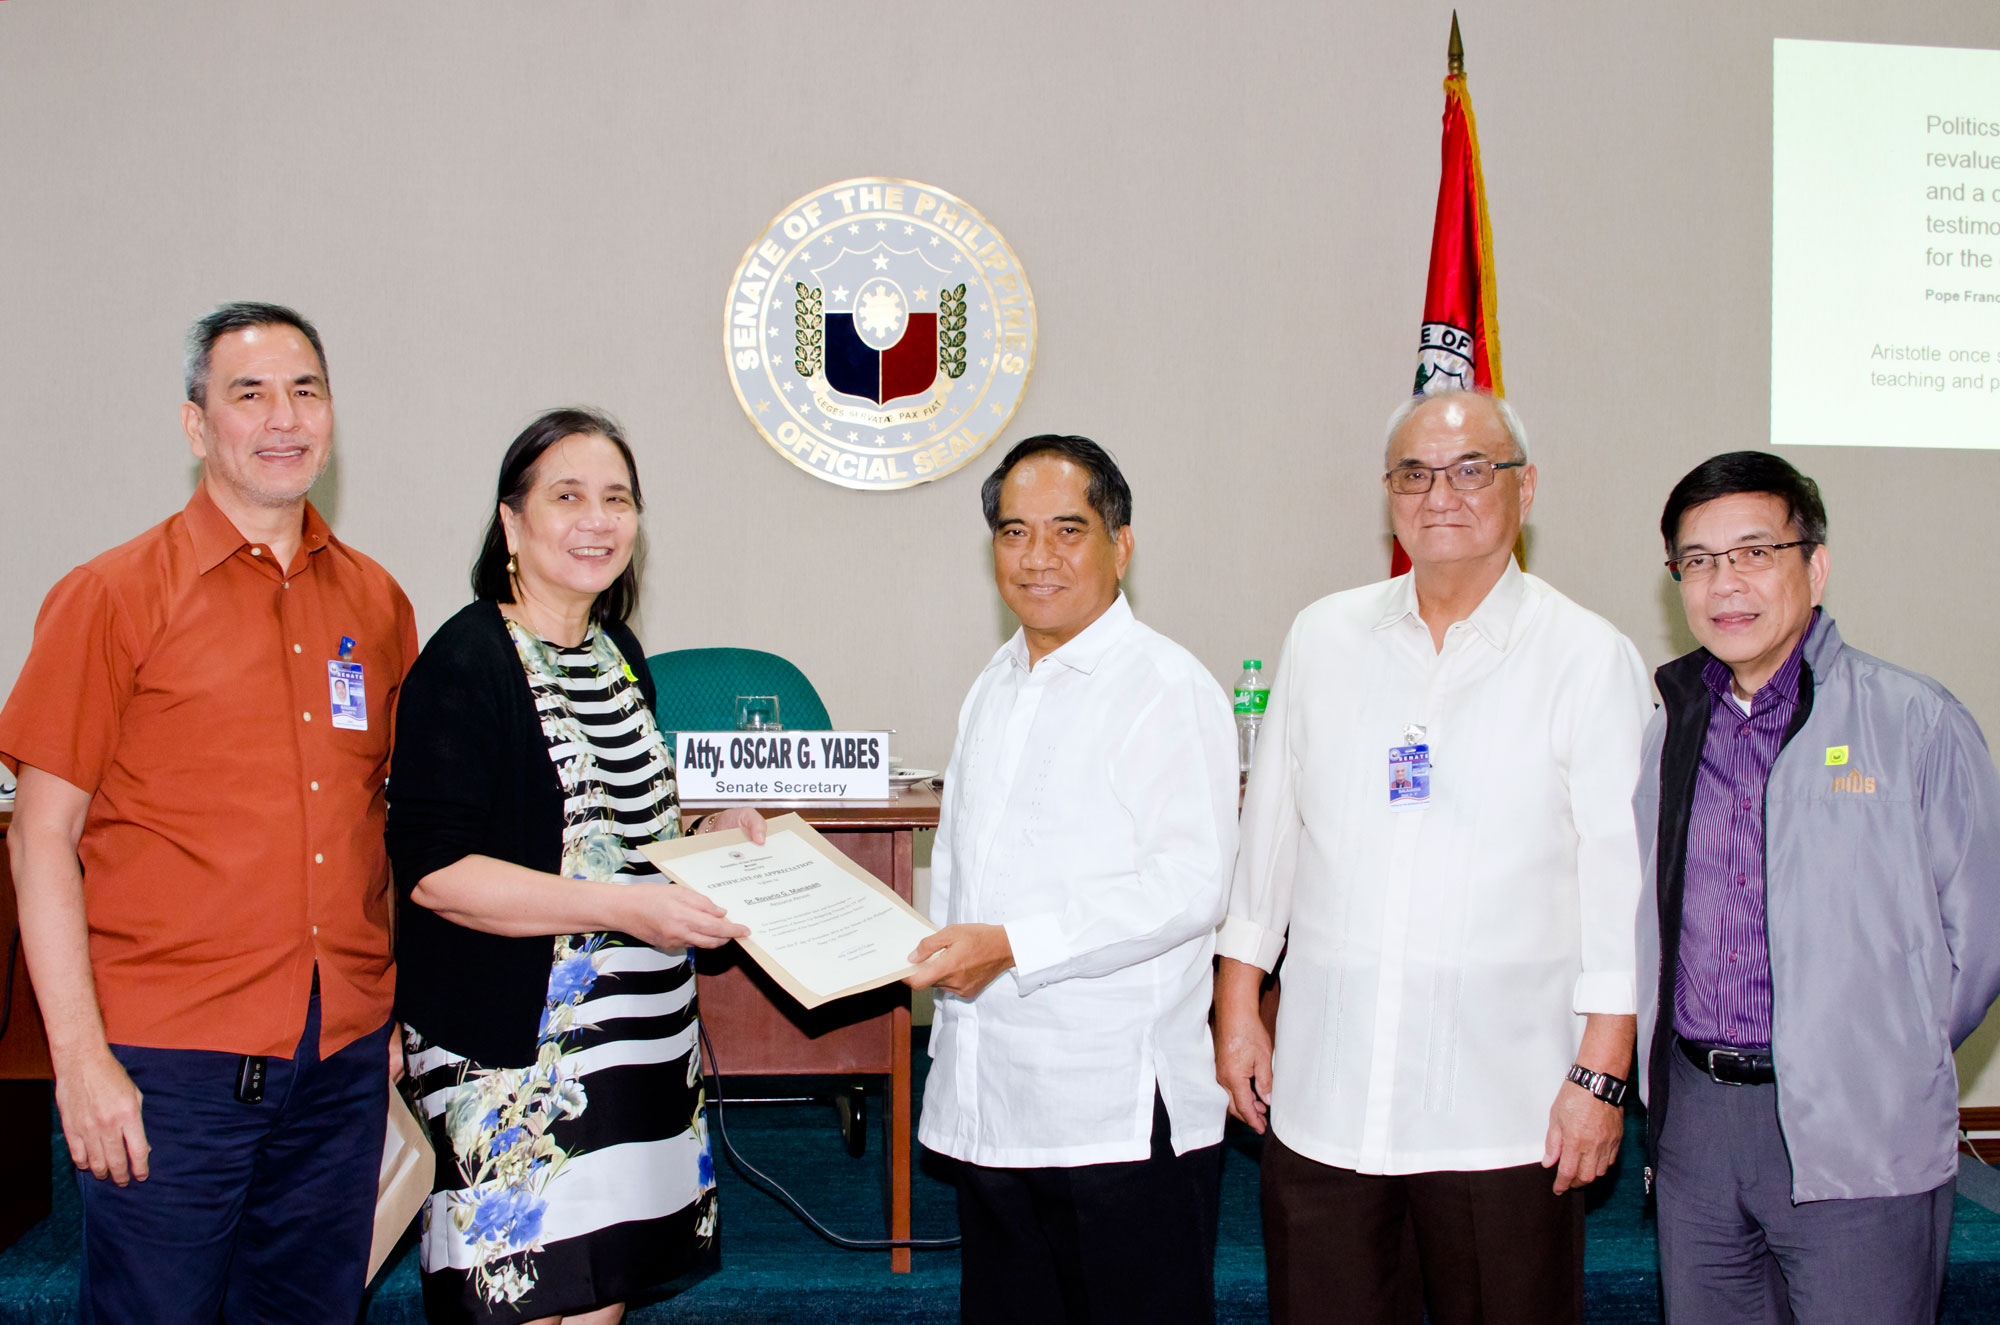 Senate Centennial Lecture Series “Assessment of the Bottom-up Budgeting Process for FY 2015-senate-rgm.jpg